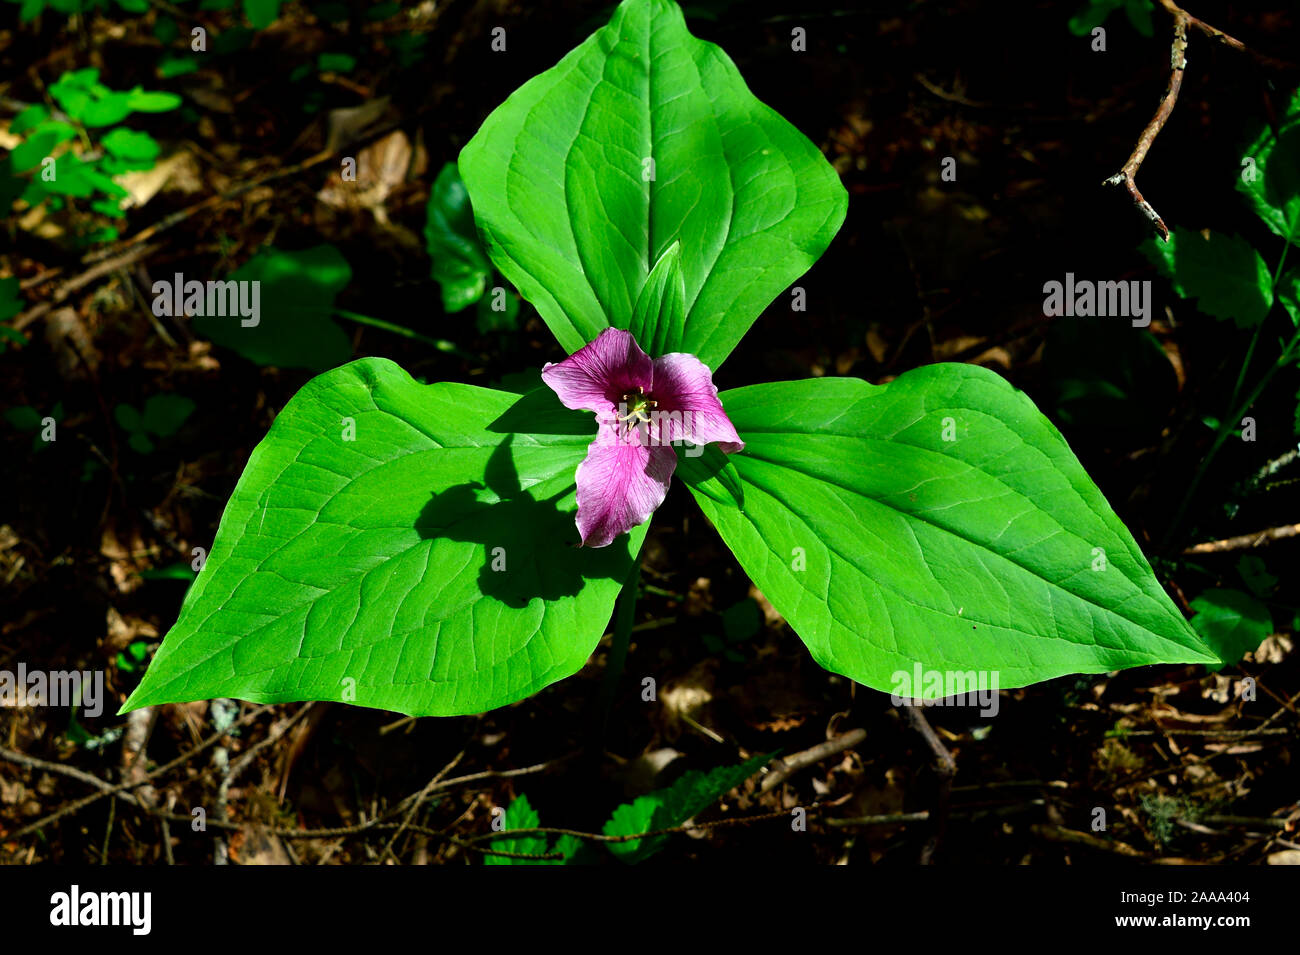 A landscape image of a Red Trillium (Trillium erectum), wildflower growing in a wooded area on Vancouver Island British Columbia Canada. Stock Photo